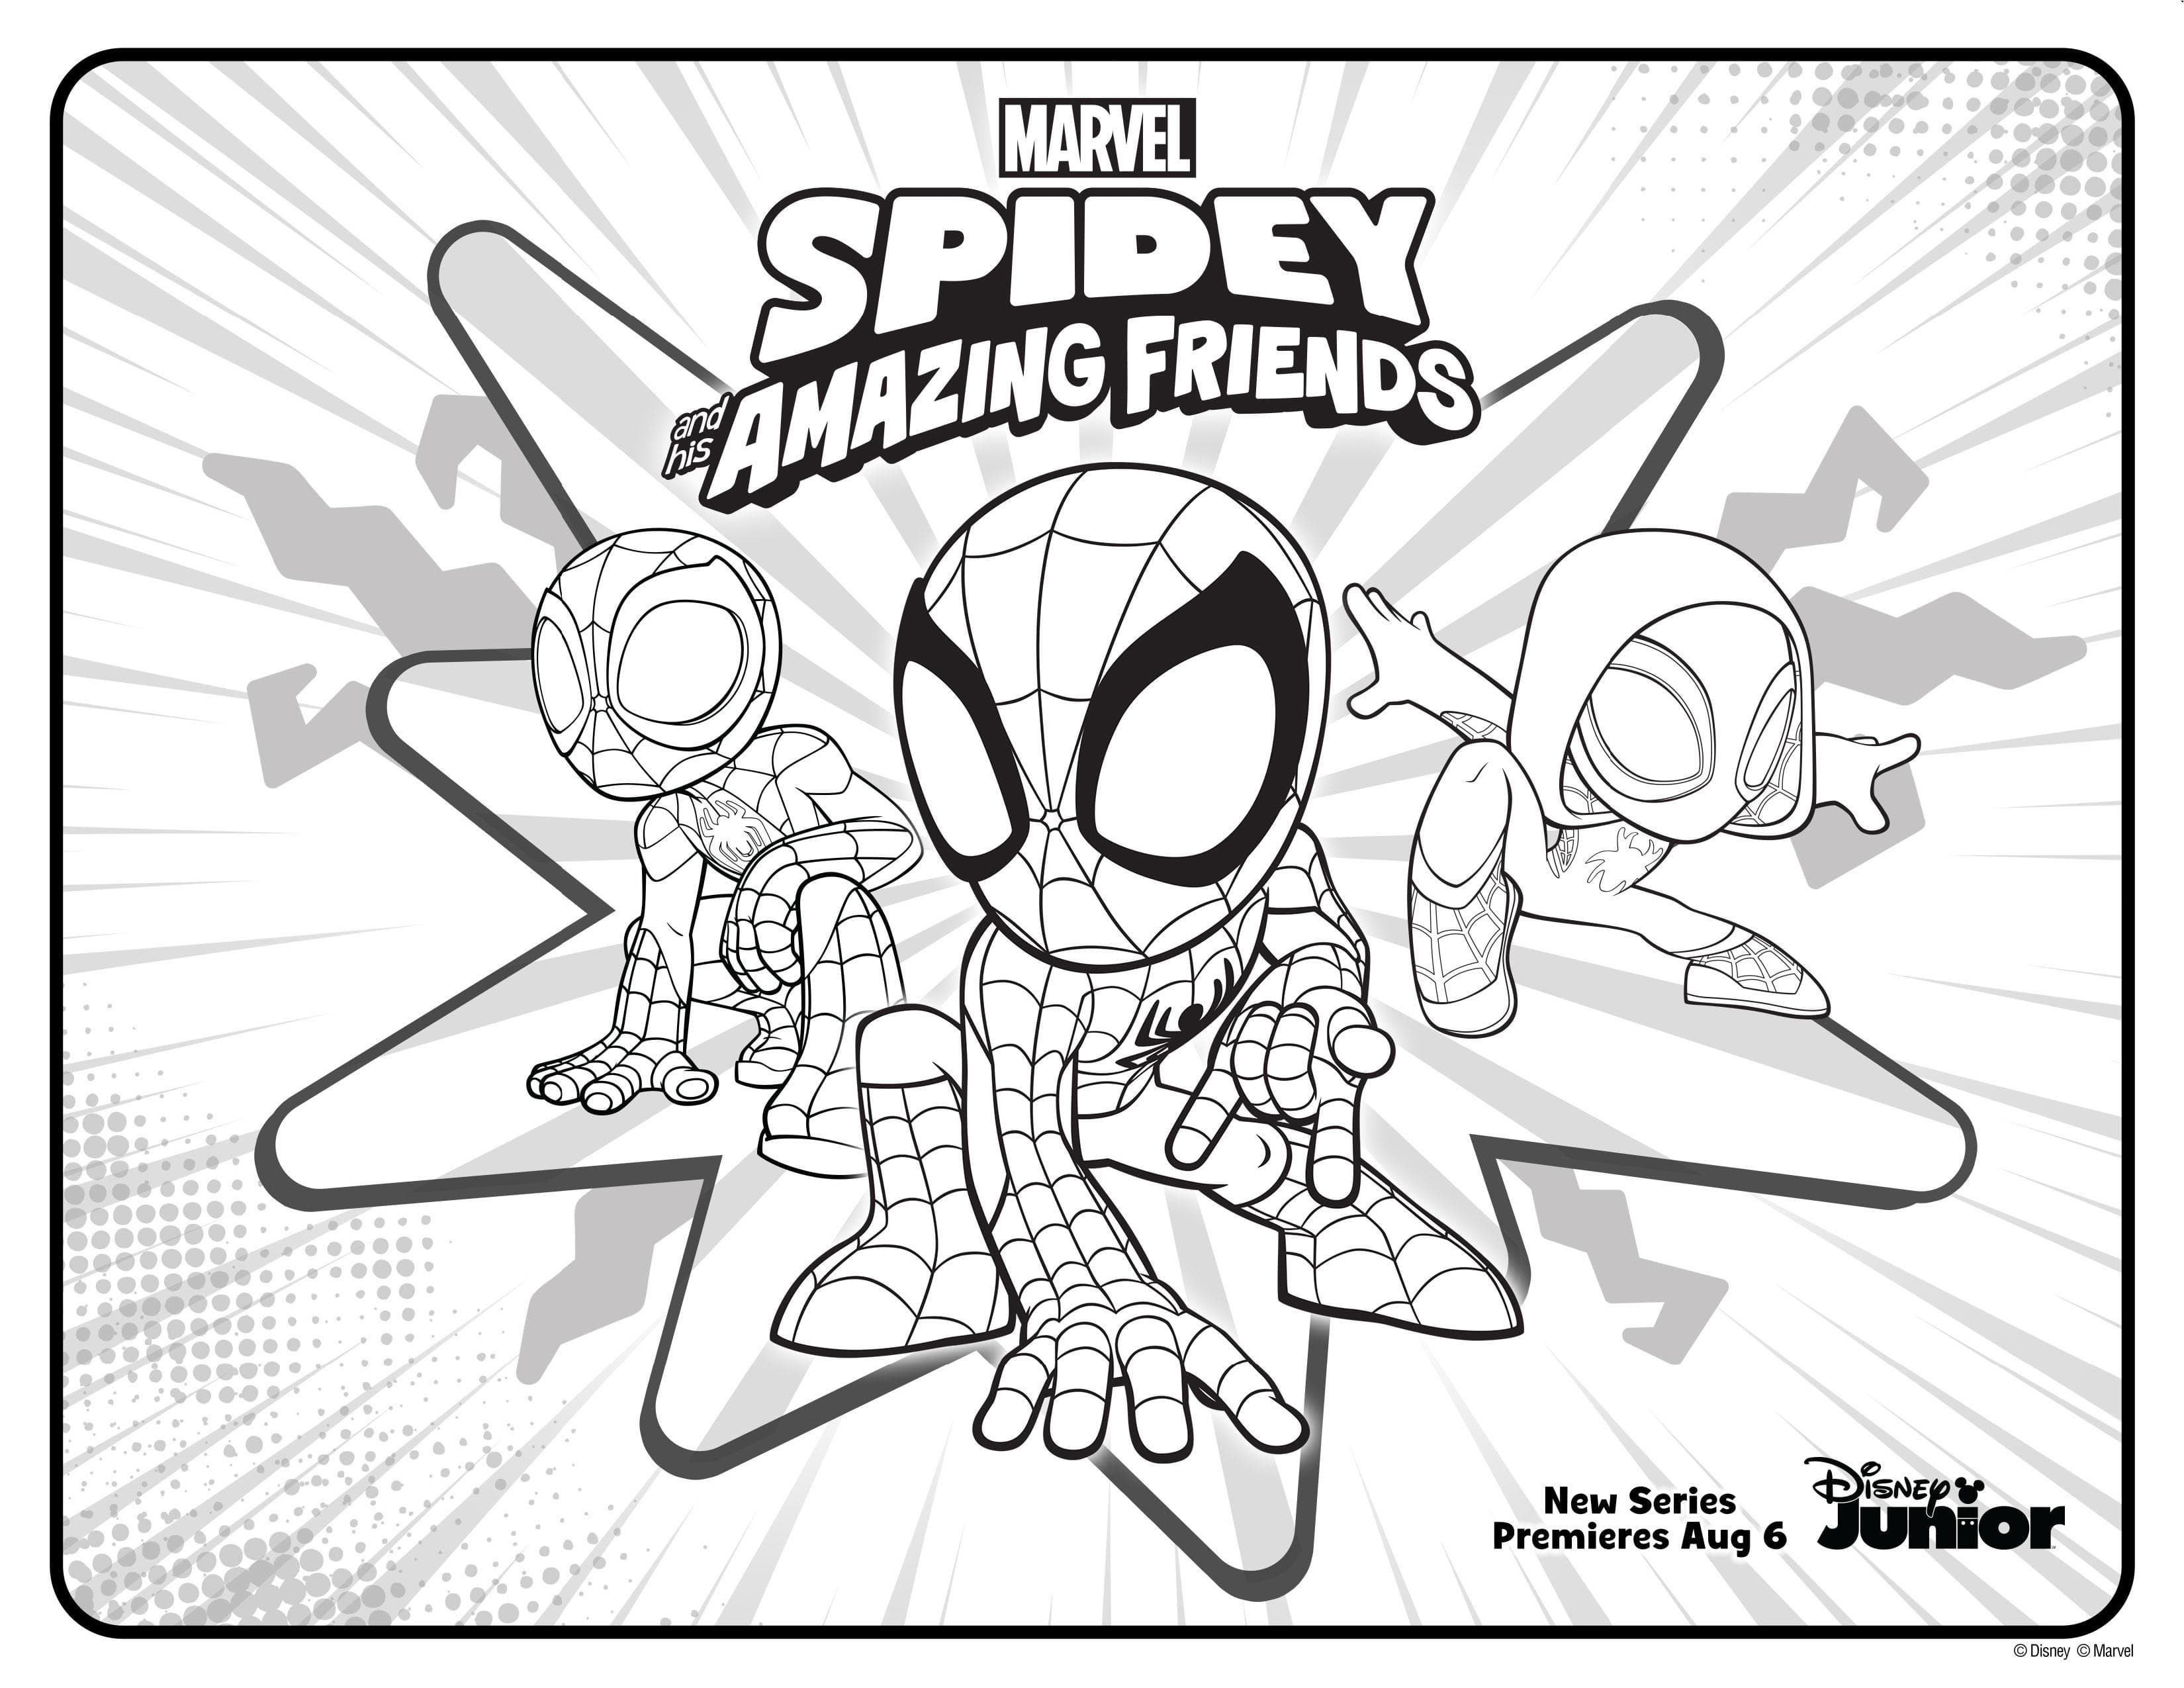 Jump into Disney Junior's Summer of Fun with Premiere of 'Marvel's ...